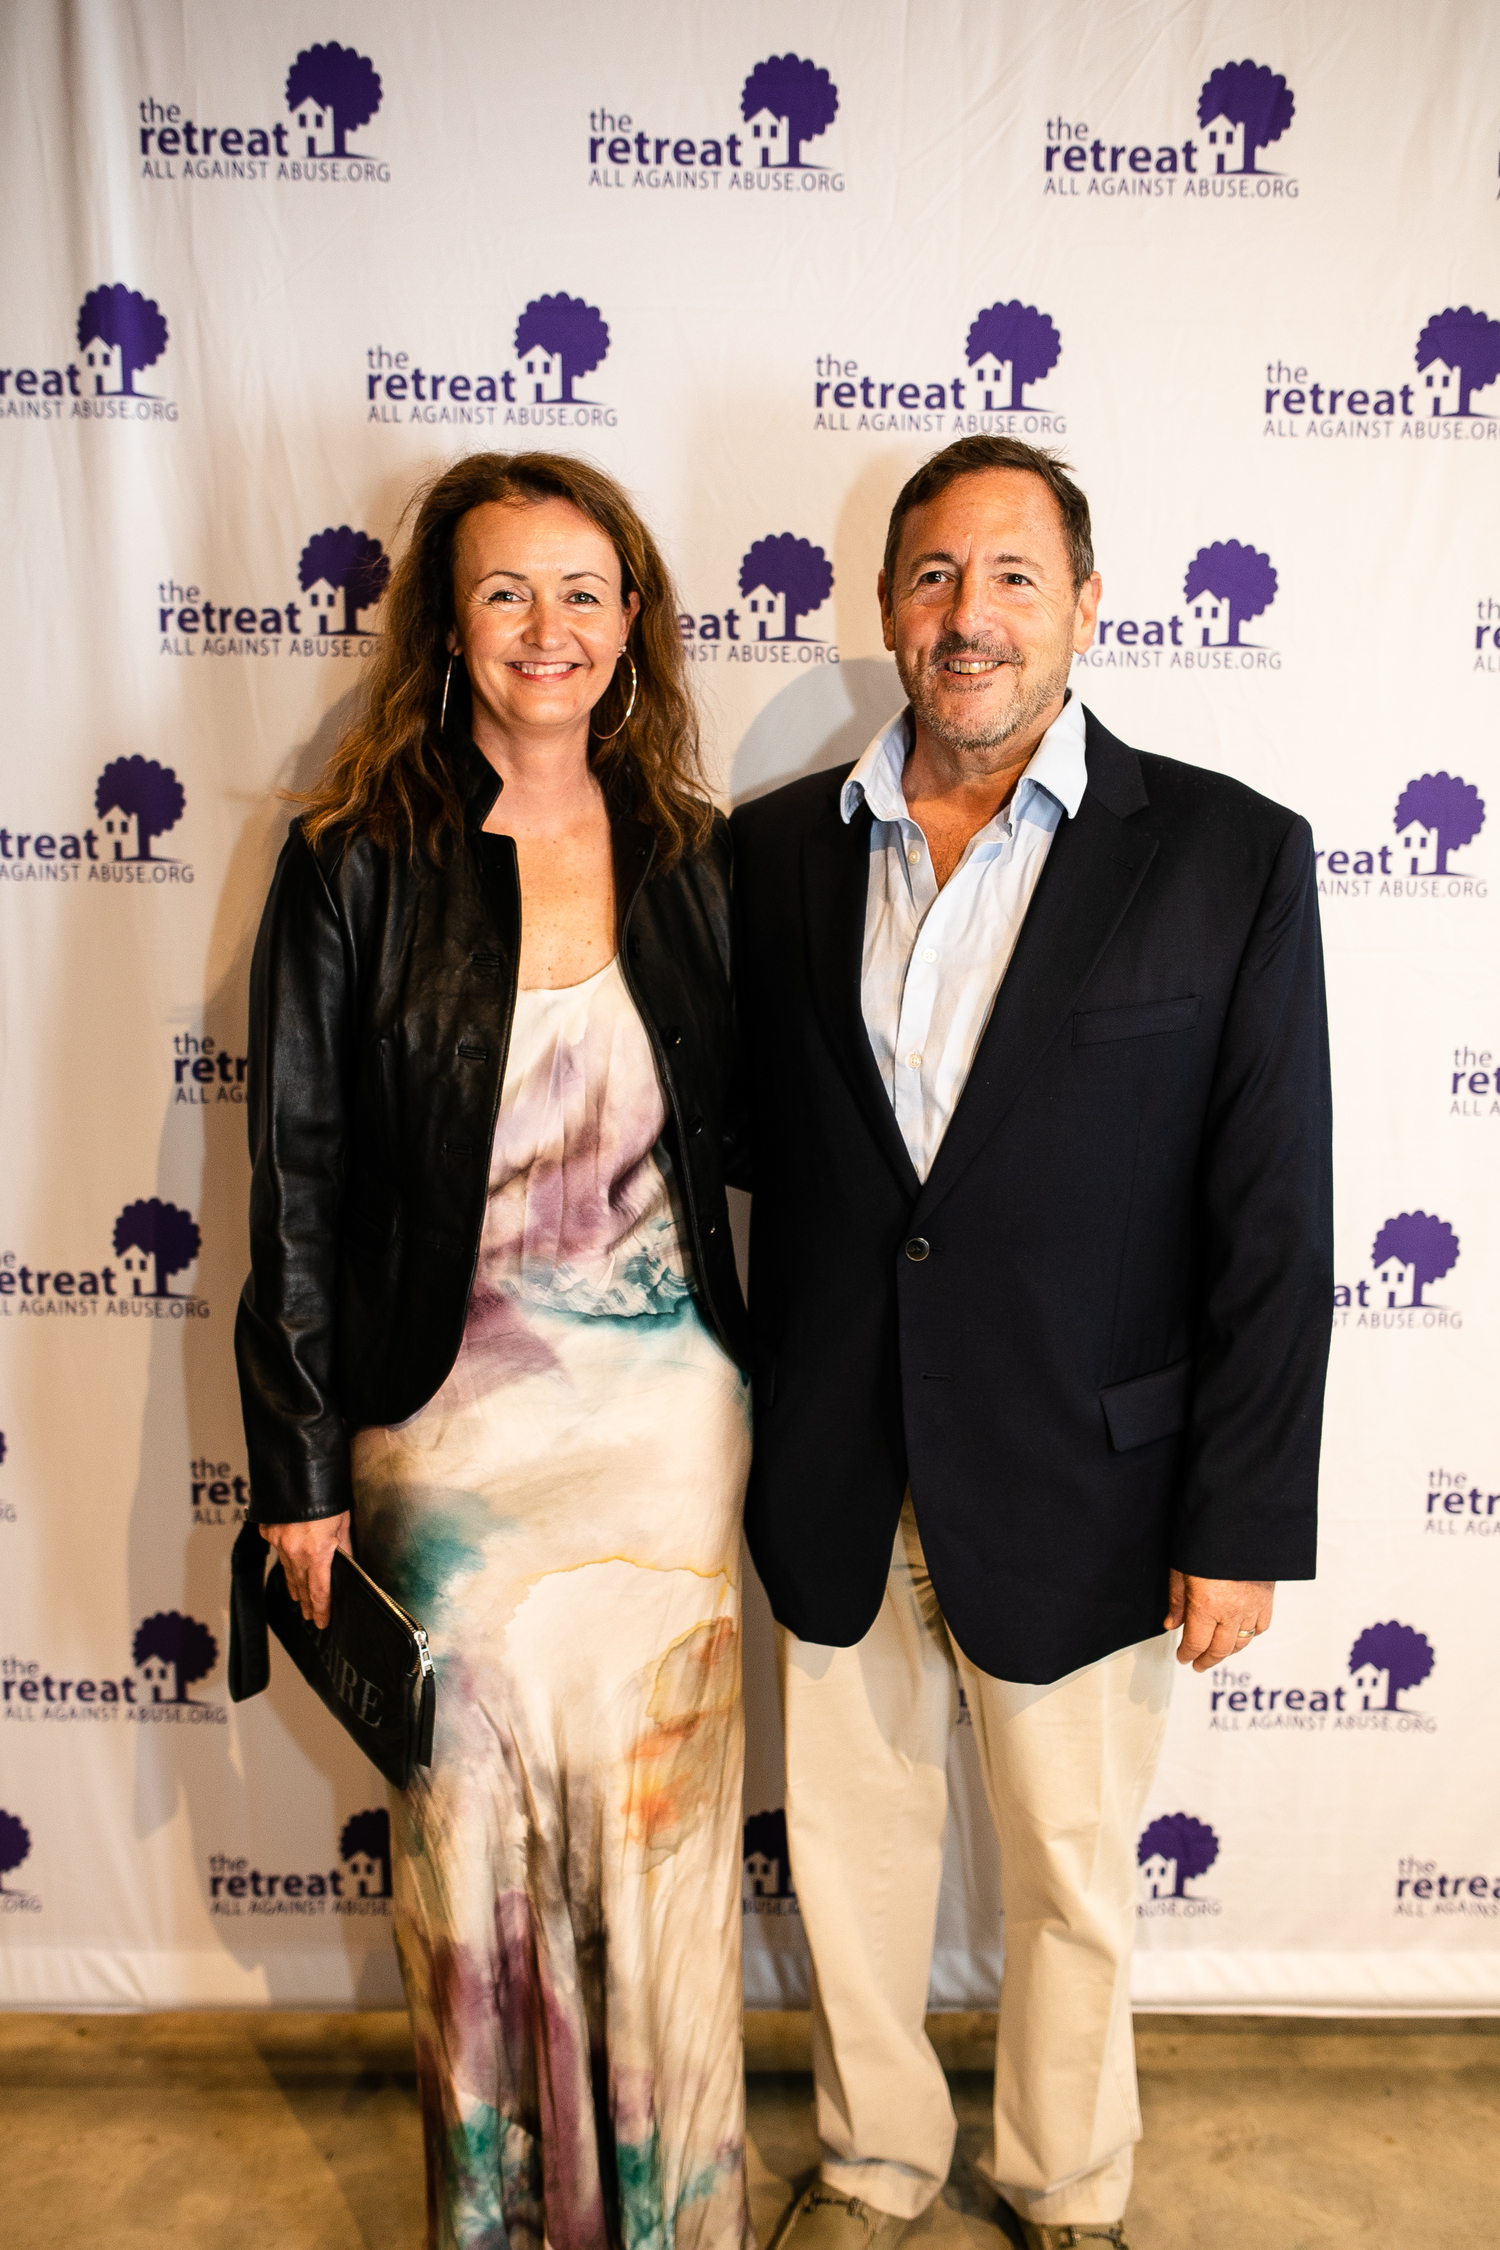 Hana Sromova and Claude Okin, of Sportime Amagansett, were the Honorees at The Retreat’s All Against Abuse gala at The Church in Sag Harbor on June 3. JESSICA DALENE WEBER